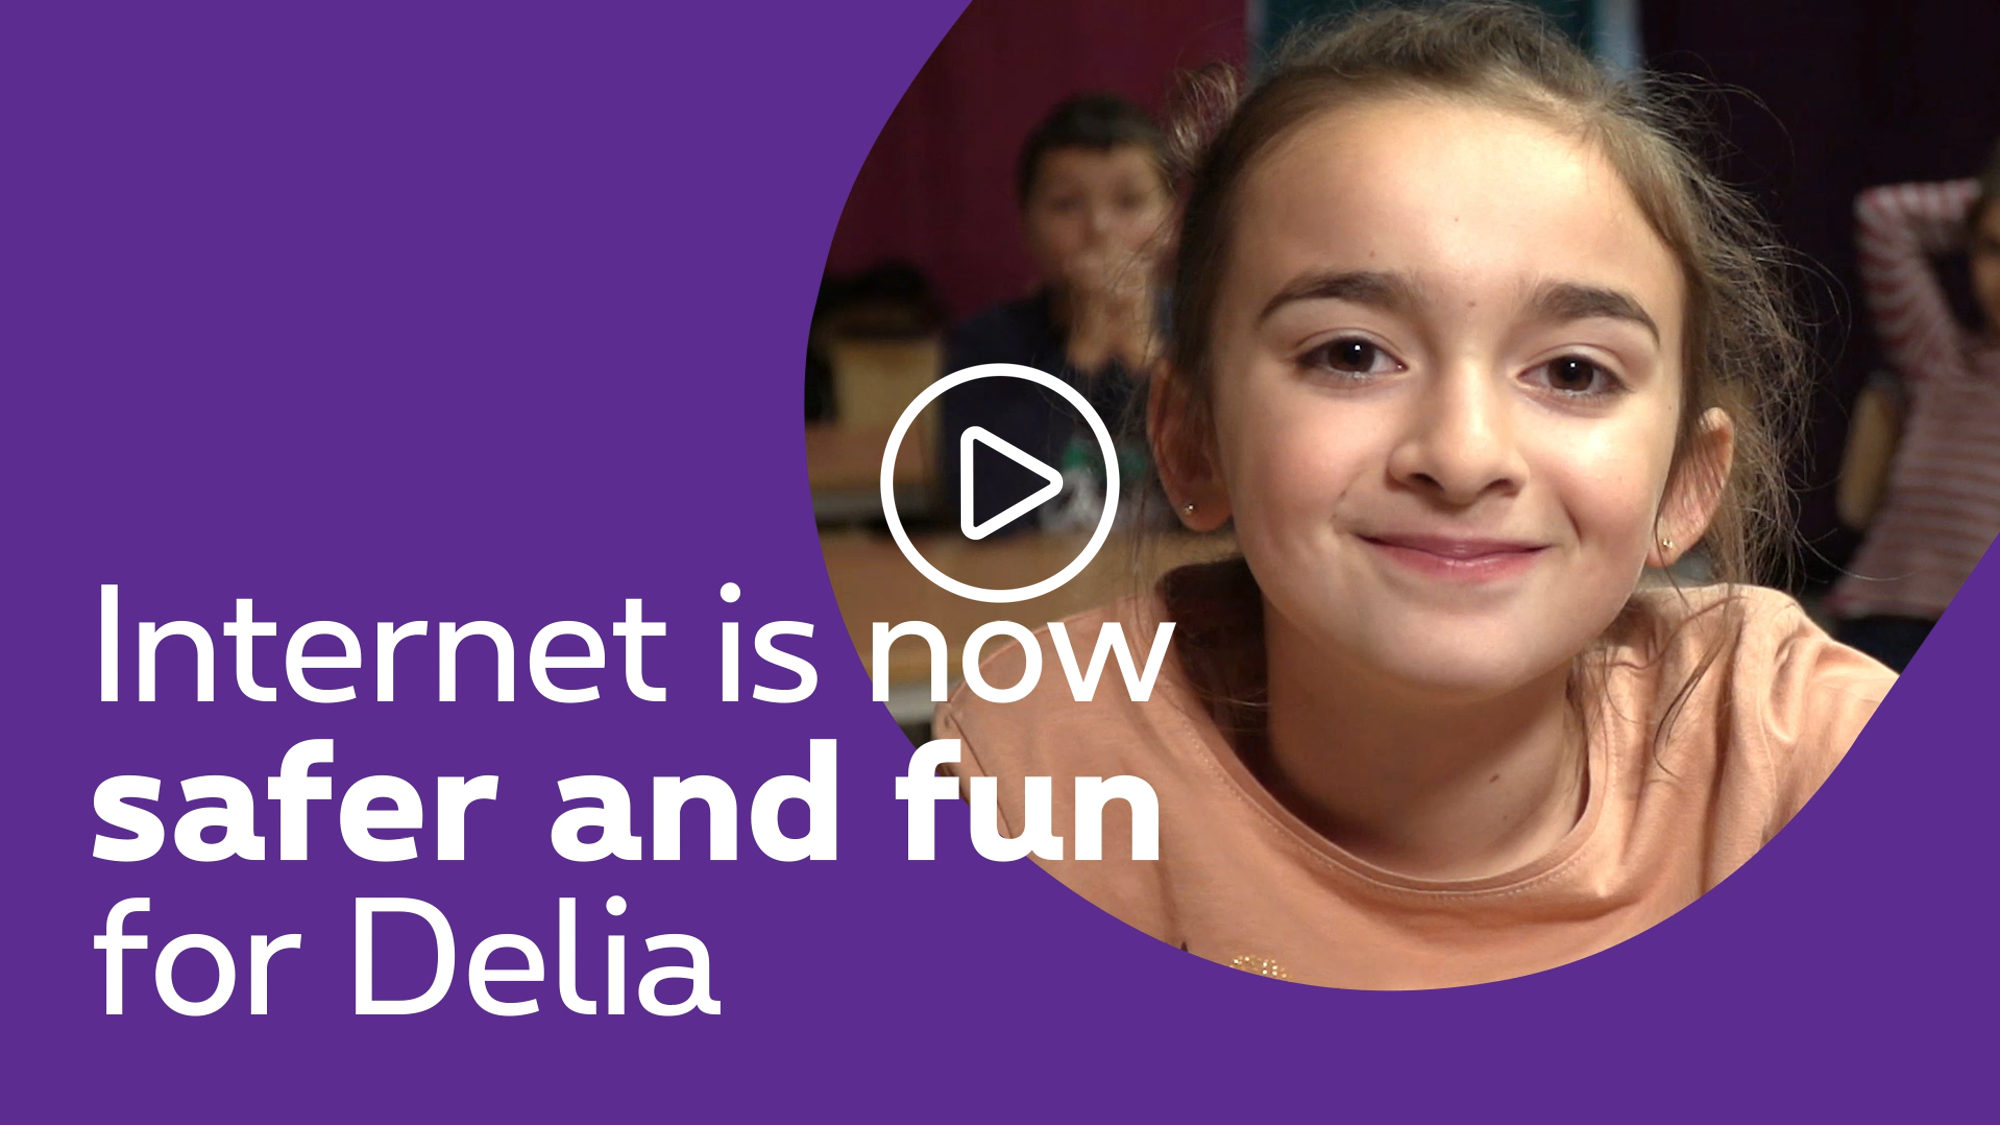 Internet is now safe and fun for Delia - click to discover the video